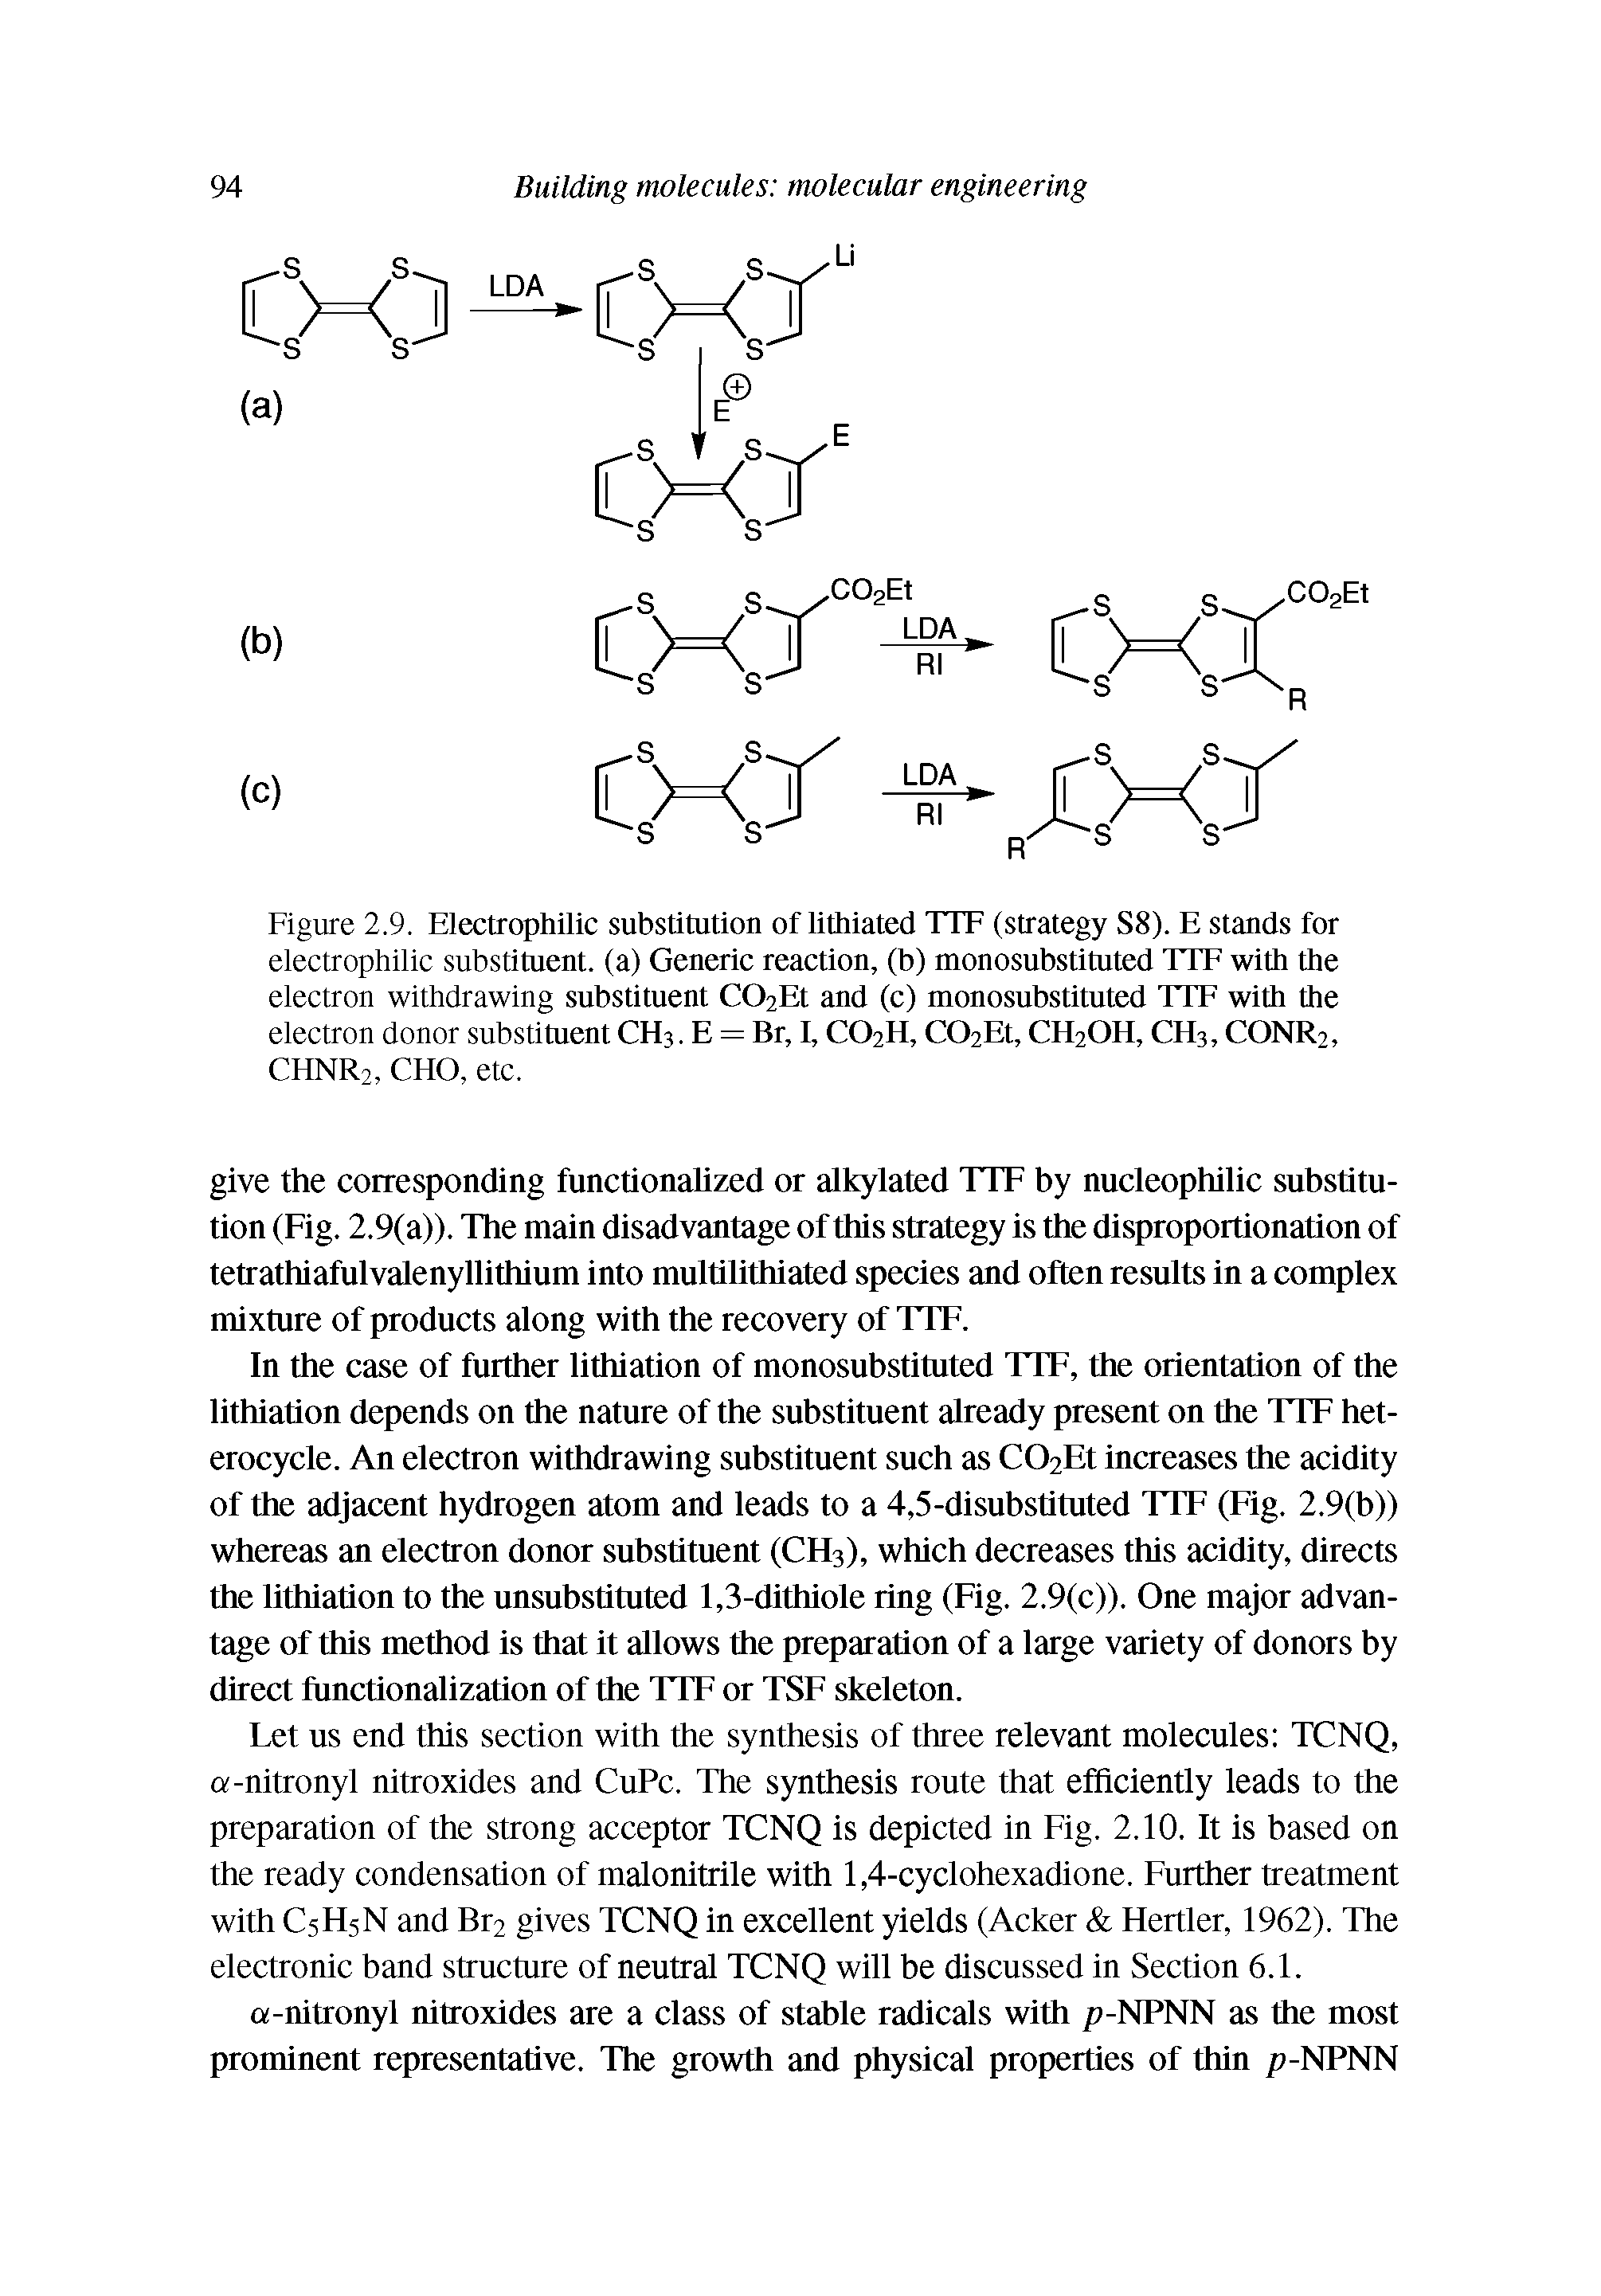 Figure 2.9. Electrophilic substitution of lithiated 1 IF (strategy S8). E stands for electrophilic substituent, (a) Generic reaction, (b) monosubstituted TTE with the electron withdrawing substituent COaEt and (c) monosubstituted TTE with the electron donor substituent CH3. E = Br, I, CO2H, COaEt, CH2OH, CH3, CONR2, CHNR2, CHO, etc.